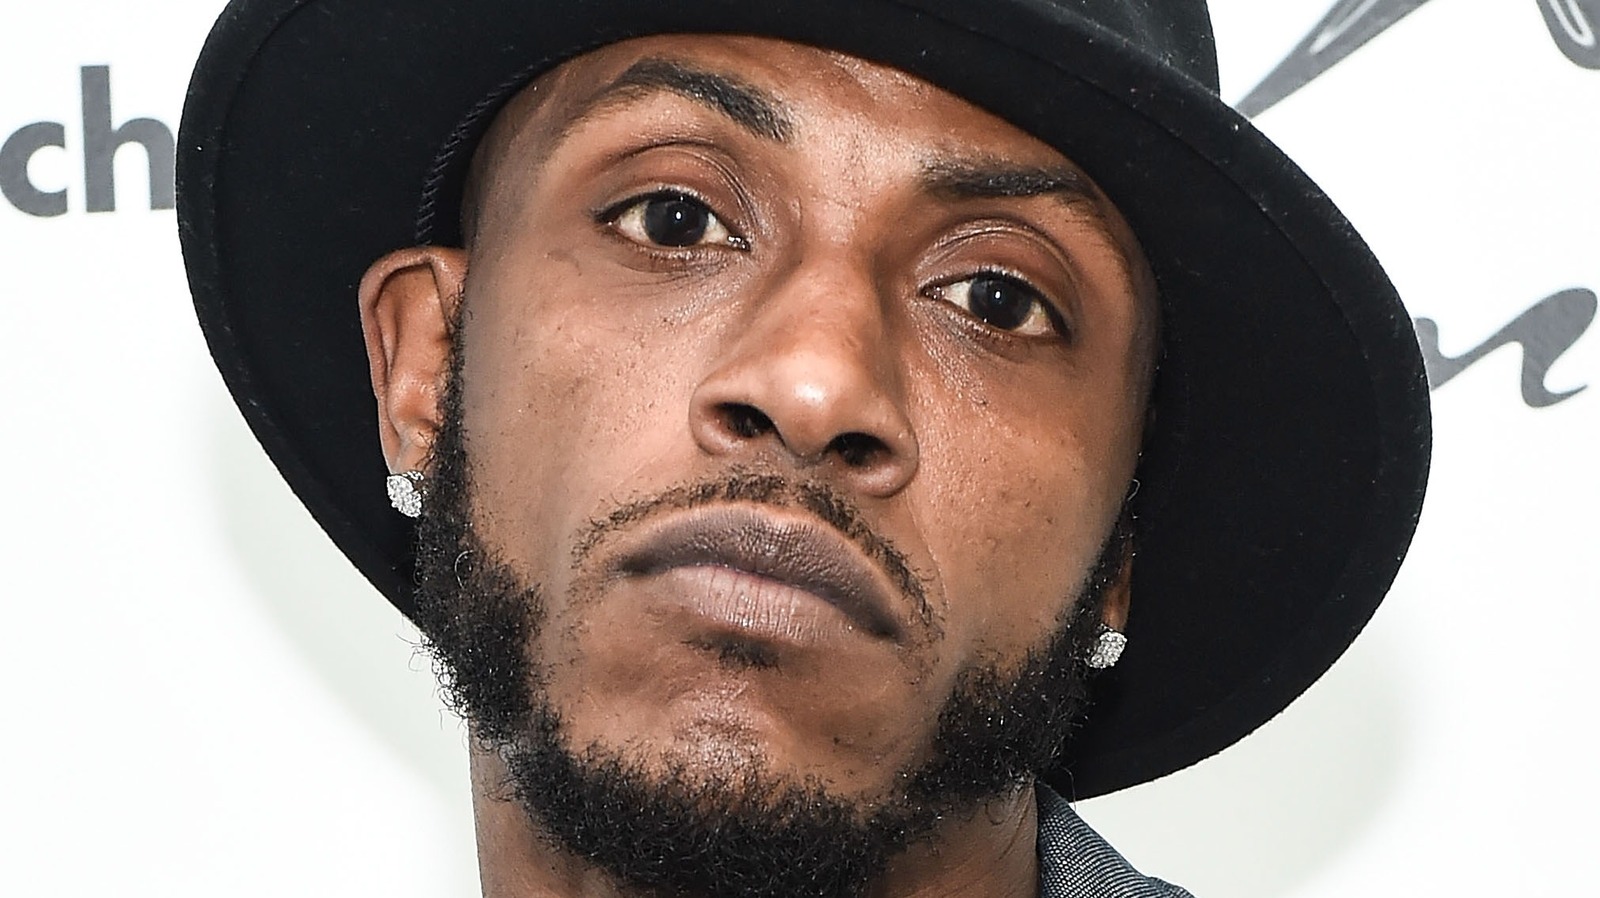 Mystikal Rapper is Being Charged for Several Disturbing Crimes